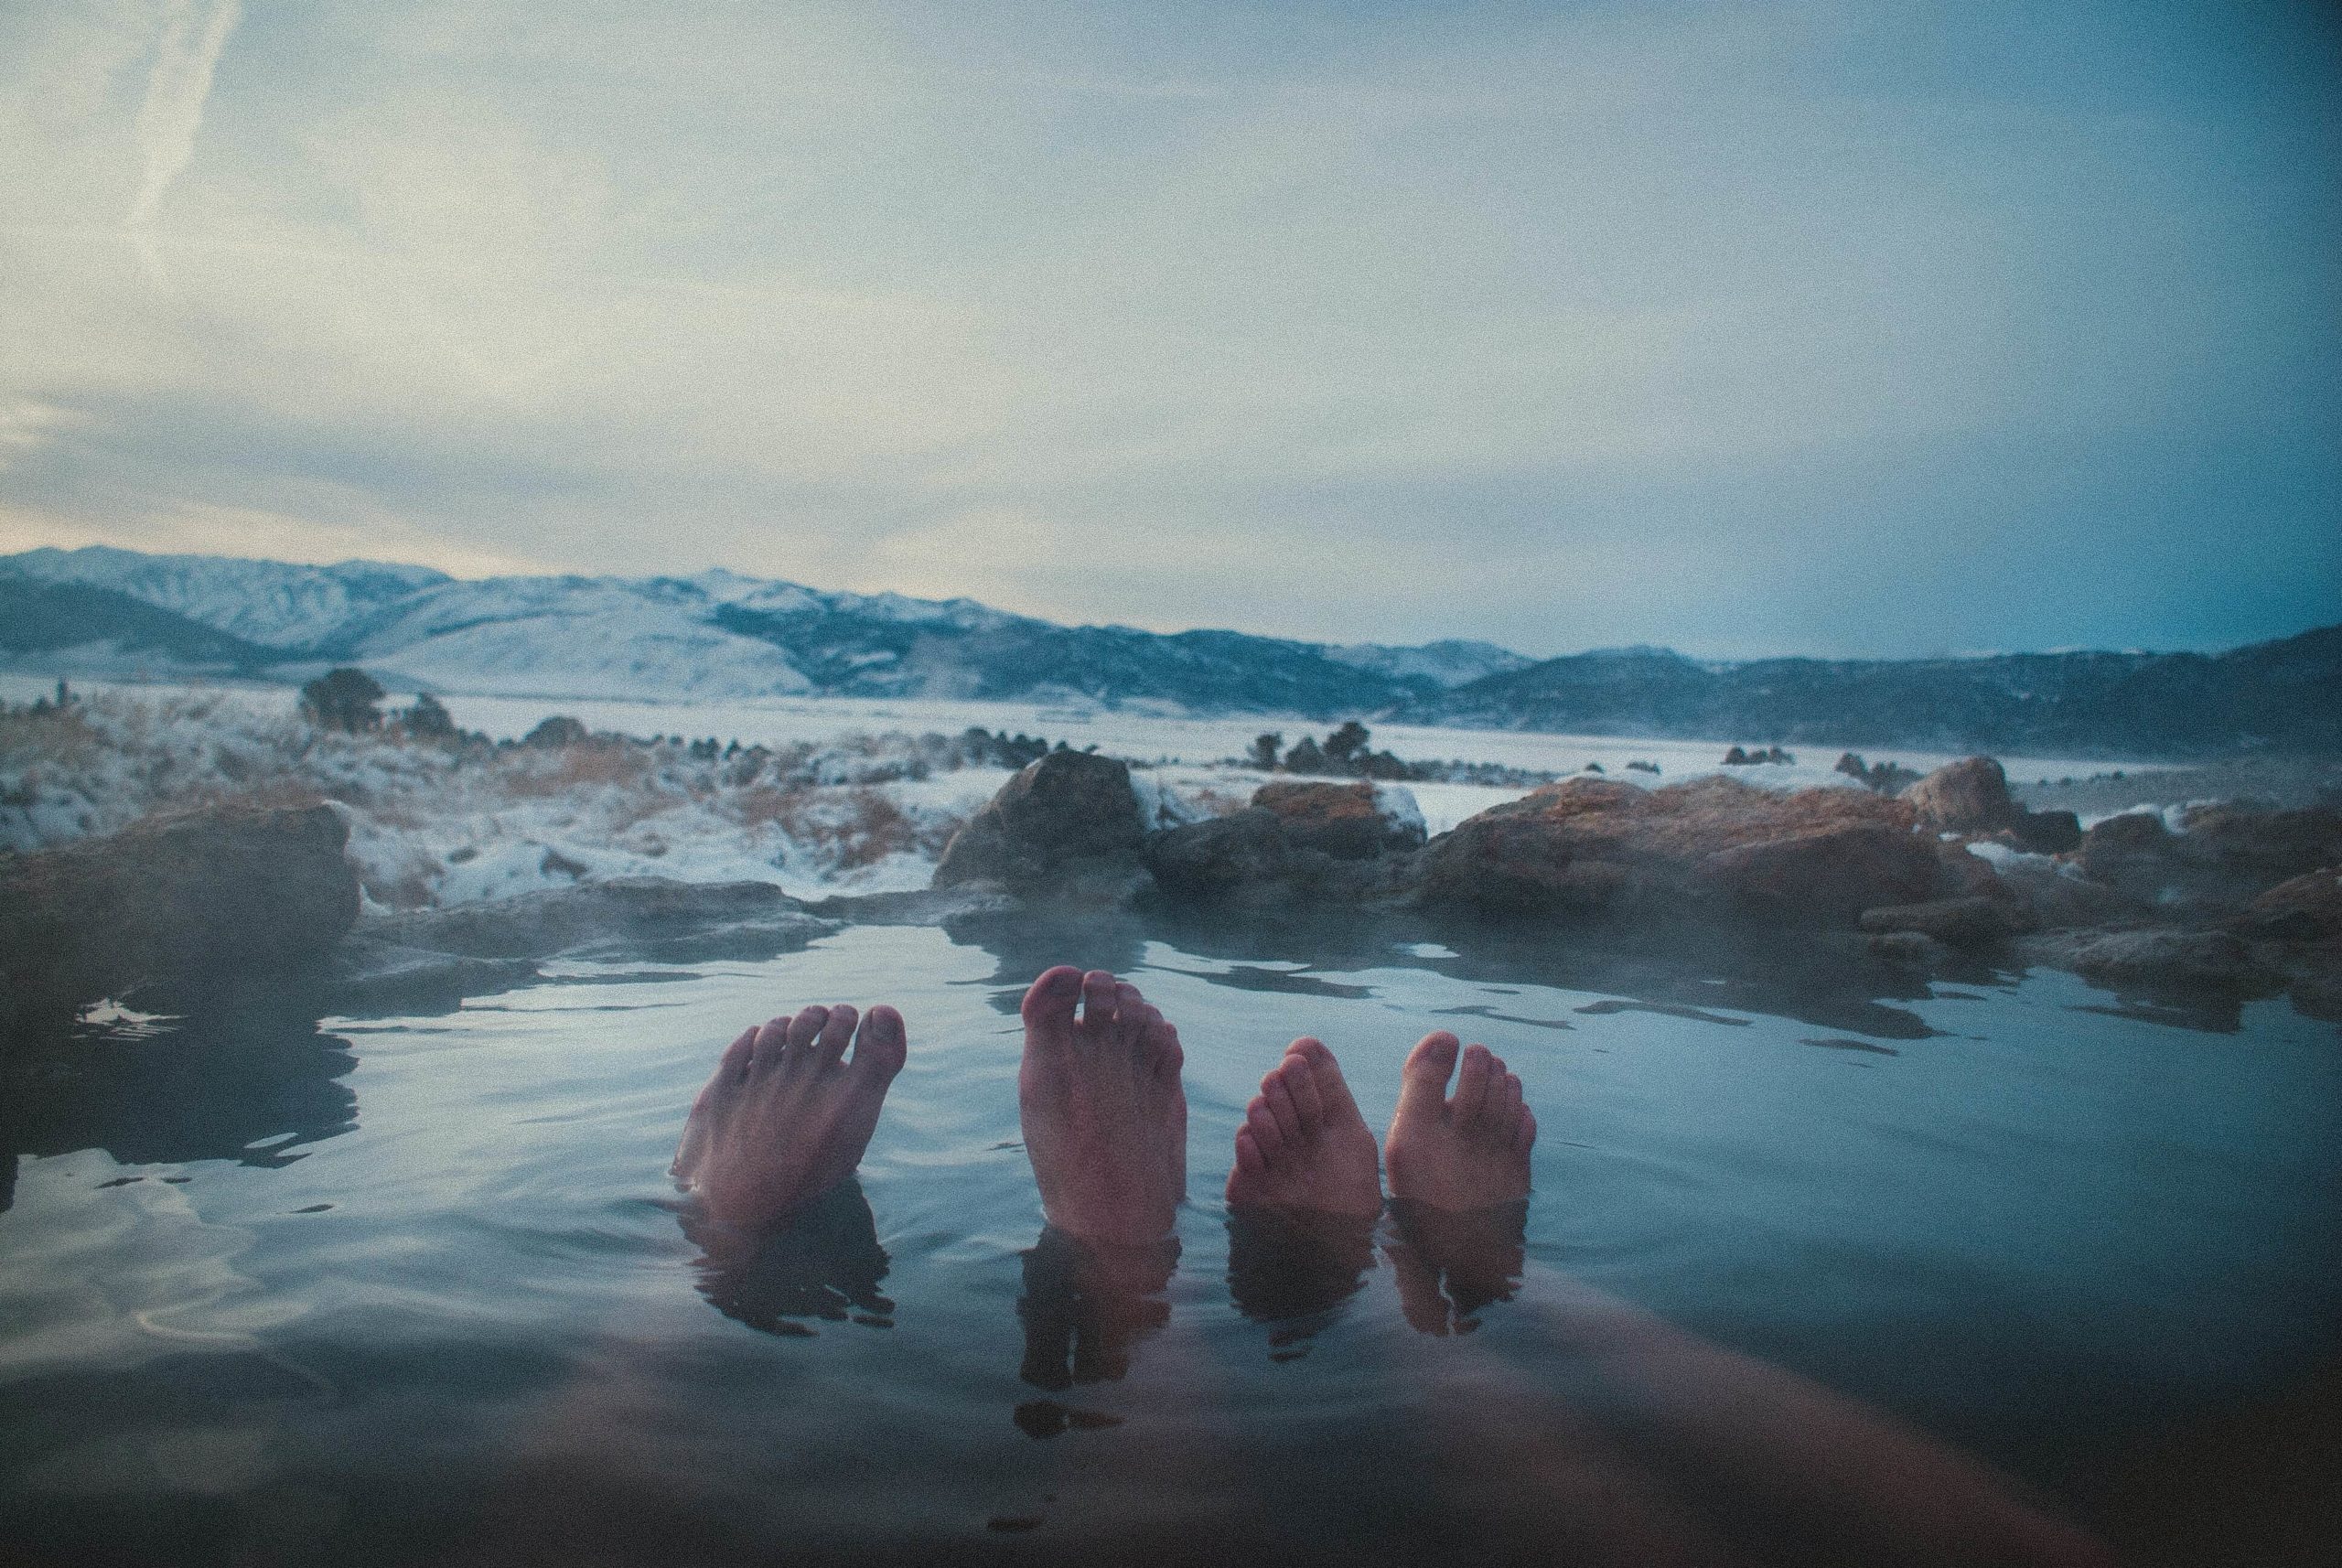 Two pairs of feet in a natural hot spring